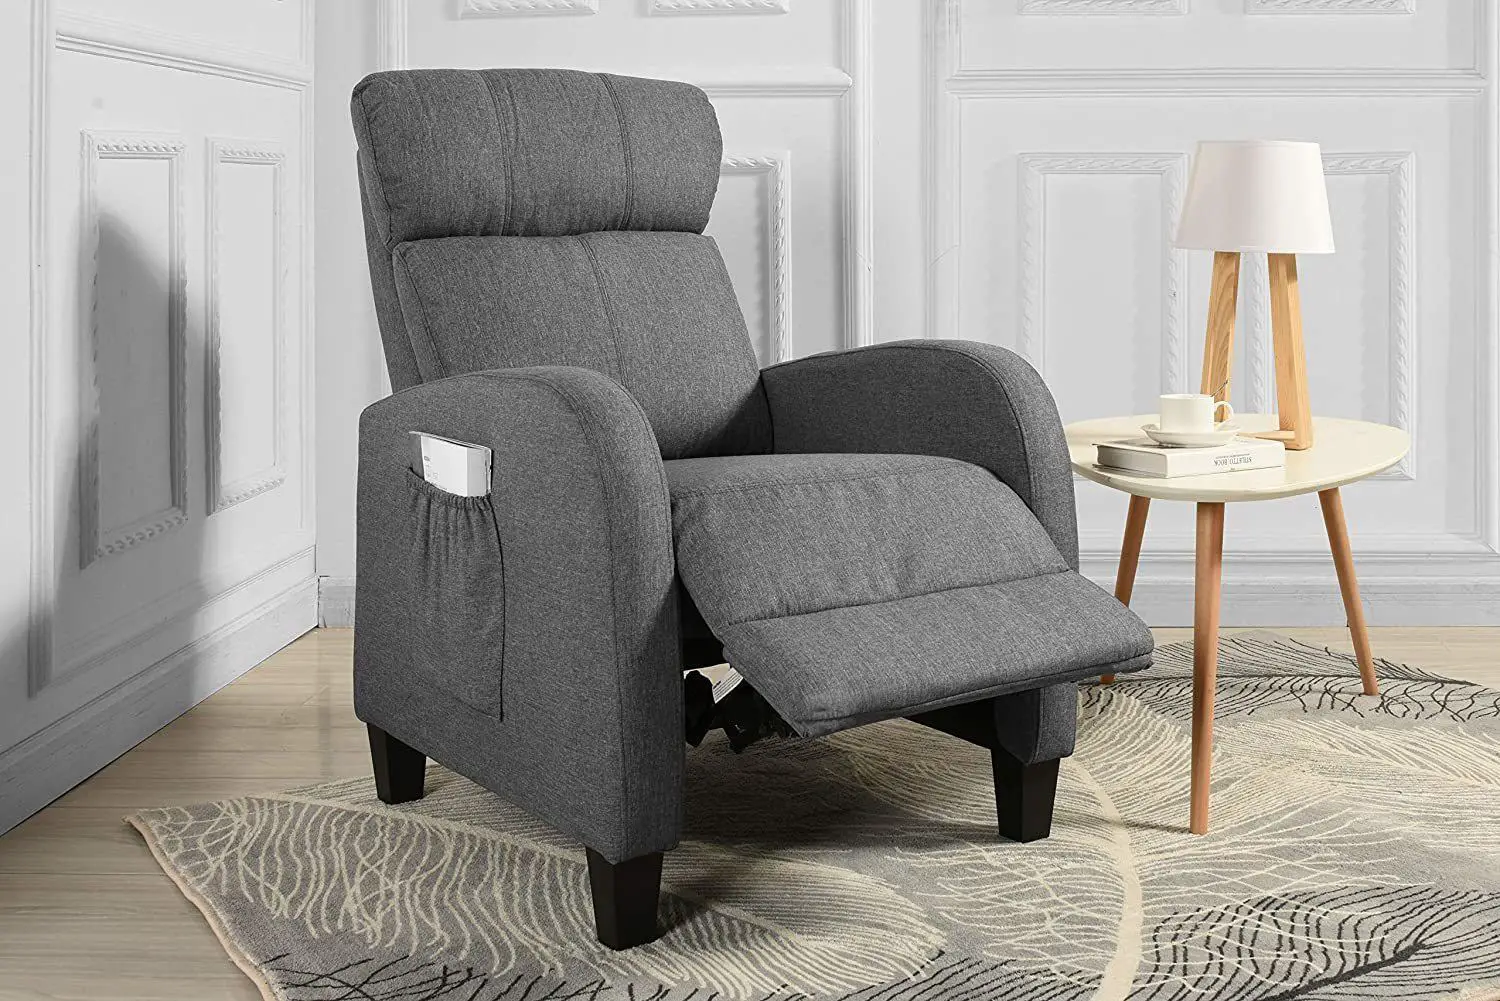 Best Living Room Chairs Under 200